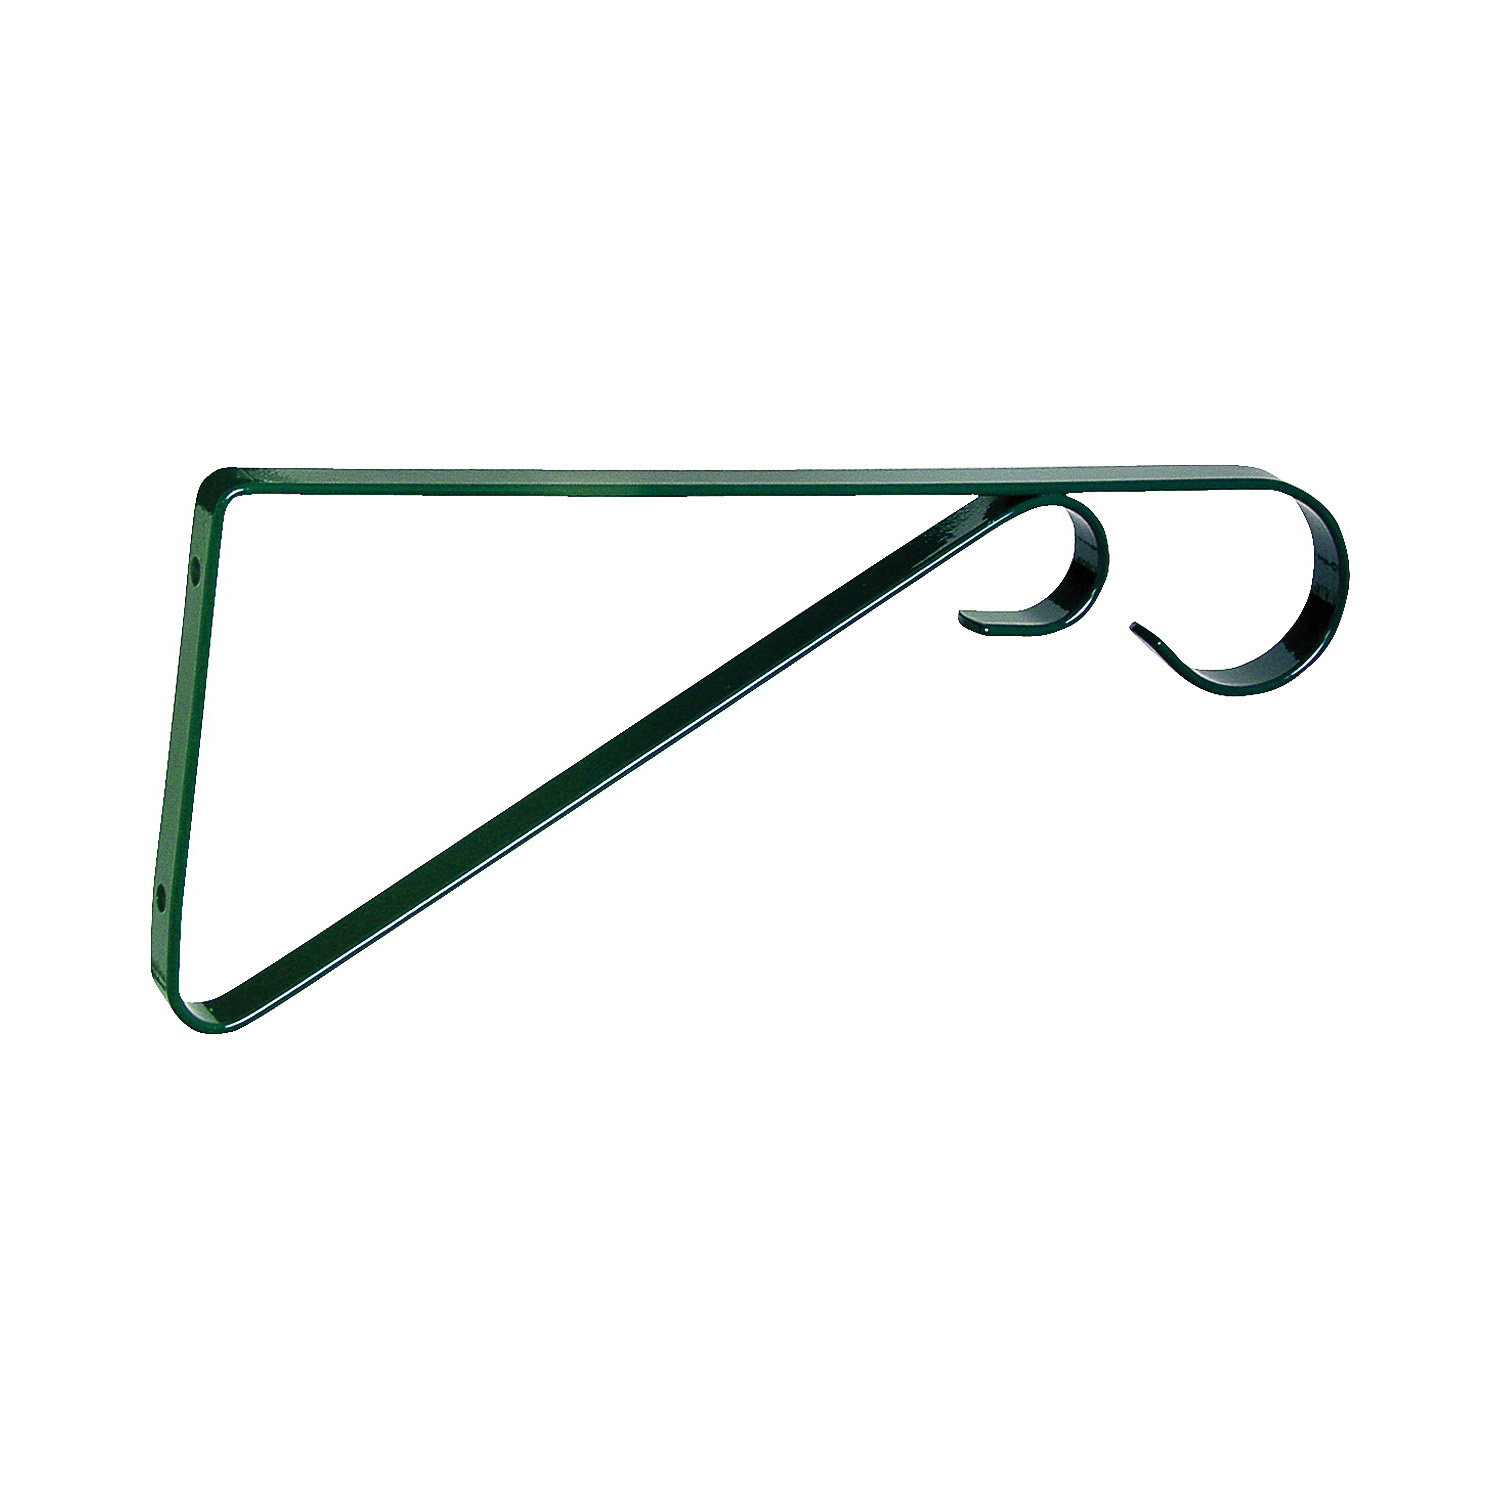 Landscapers Select GB0363L Hanging Plant Bracket, 9-5/8 L, Steel, Forest green, Wall Mount Mounting